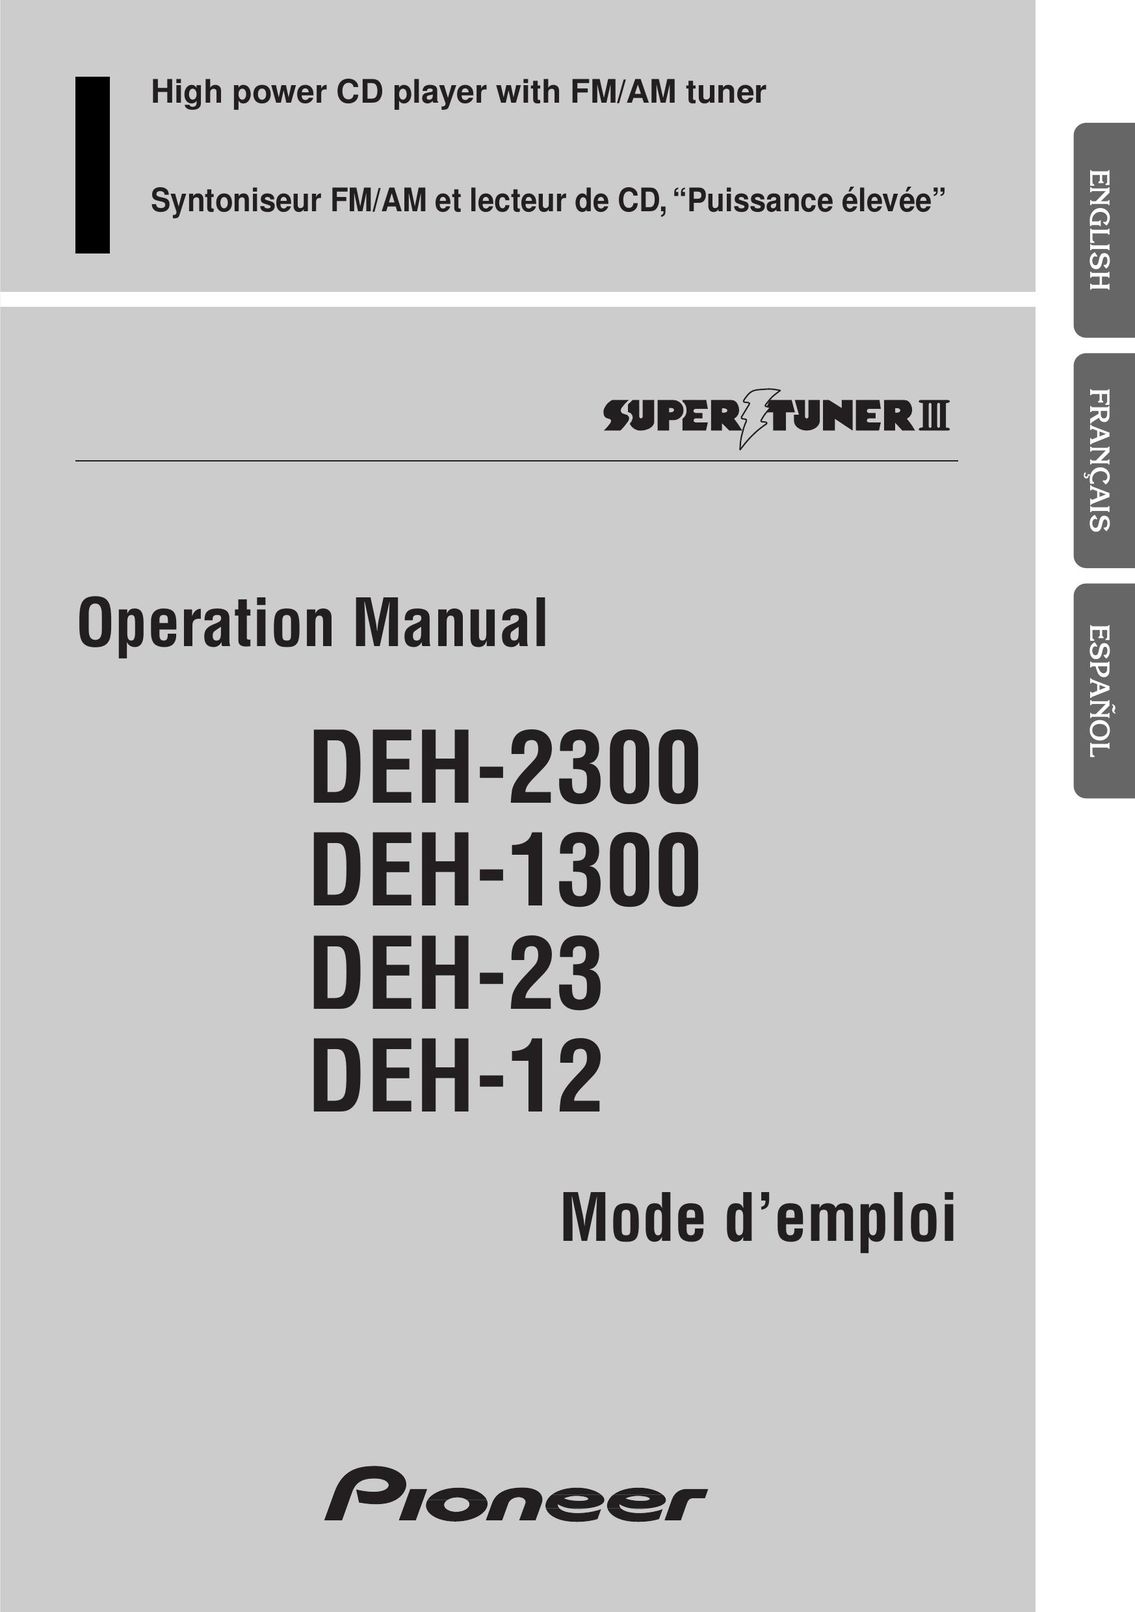 Pioneer DEH-2300 Stereo System User Manual